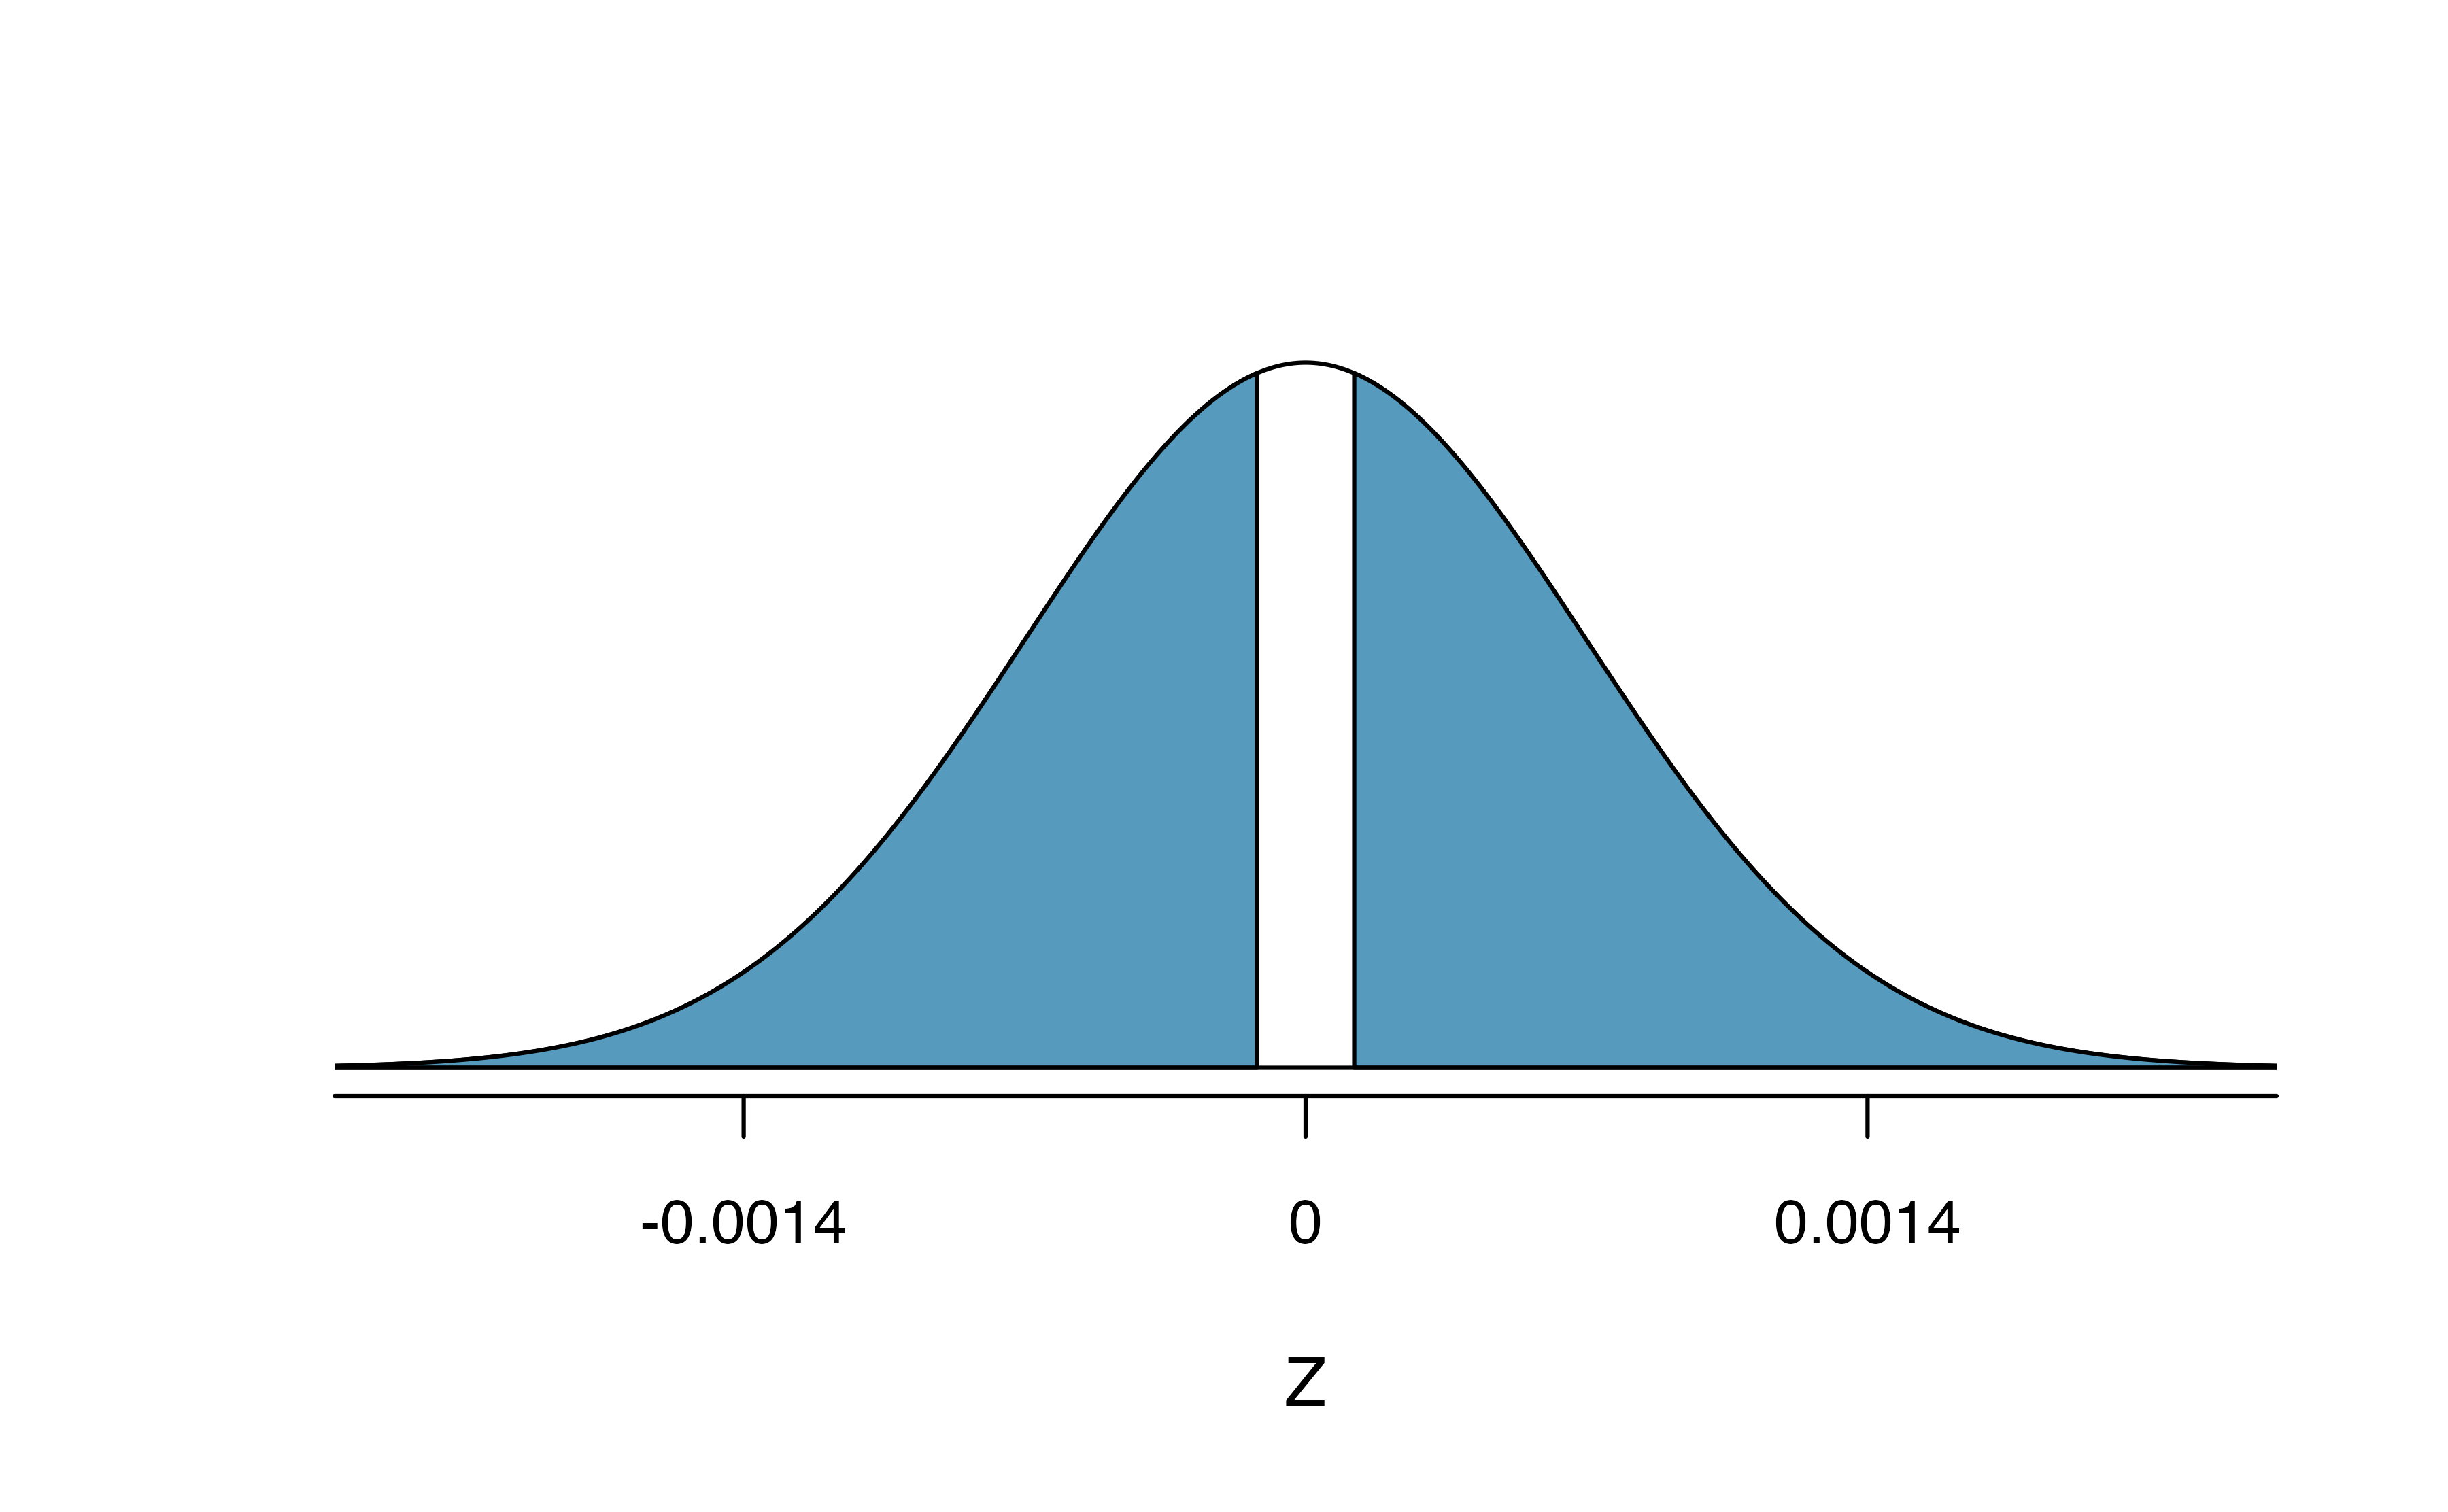 Standard normal distribution with the p-value shaded. The shaded area represents the probability of observing a difference in sample proportions of -0.17 or further away from zero, if the true proportions were equal.